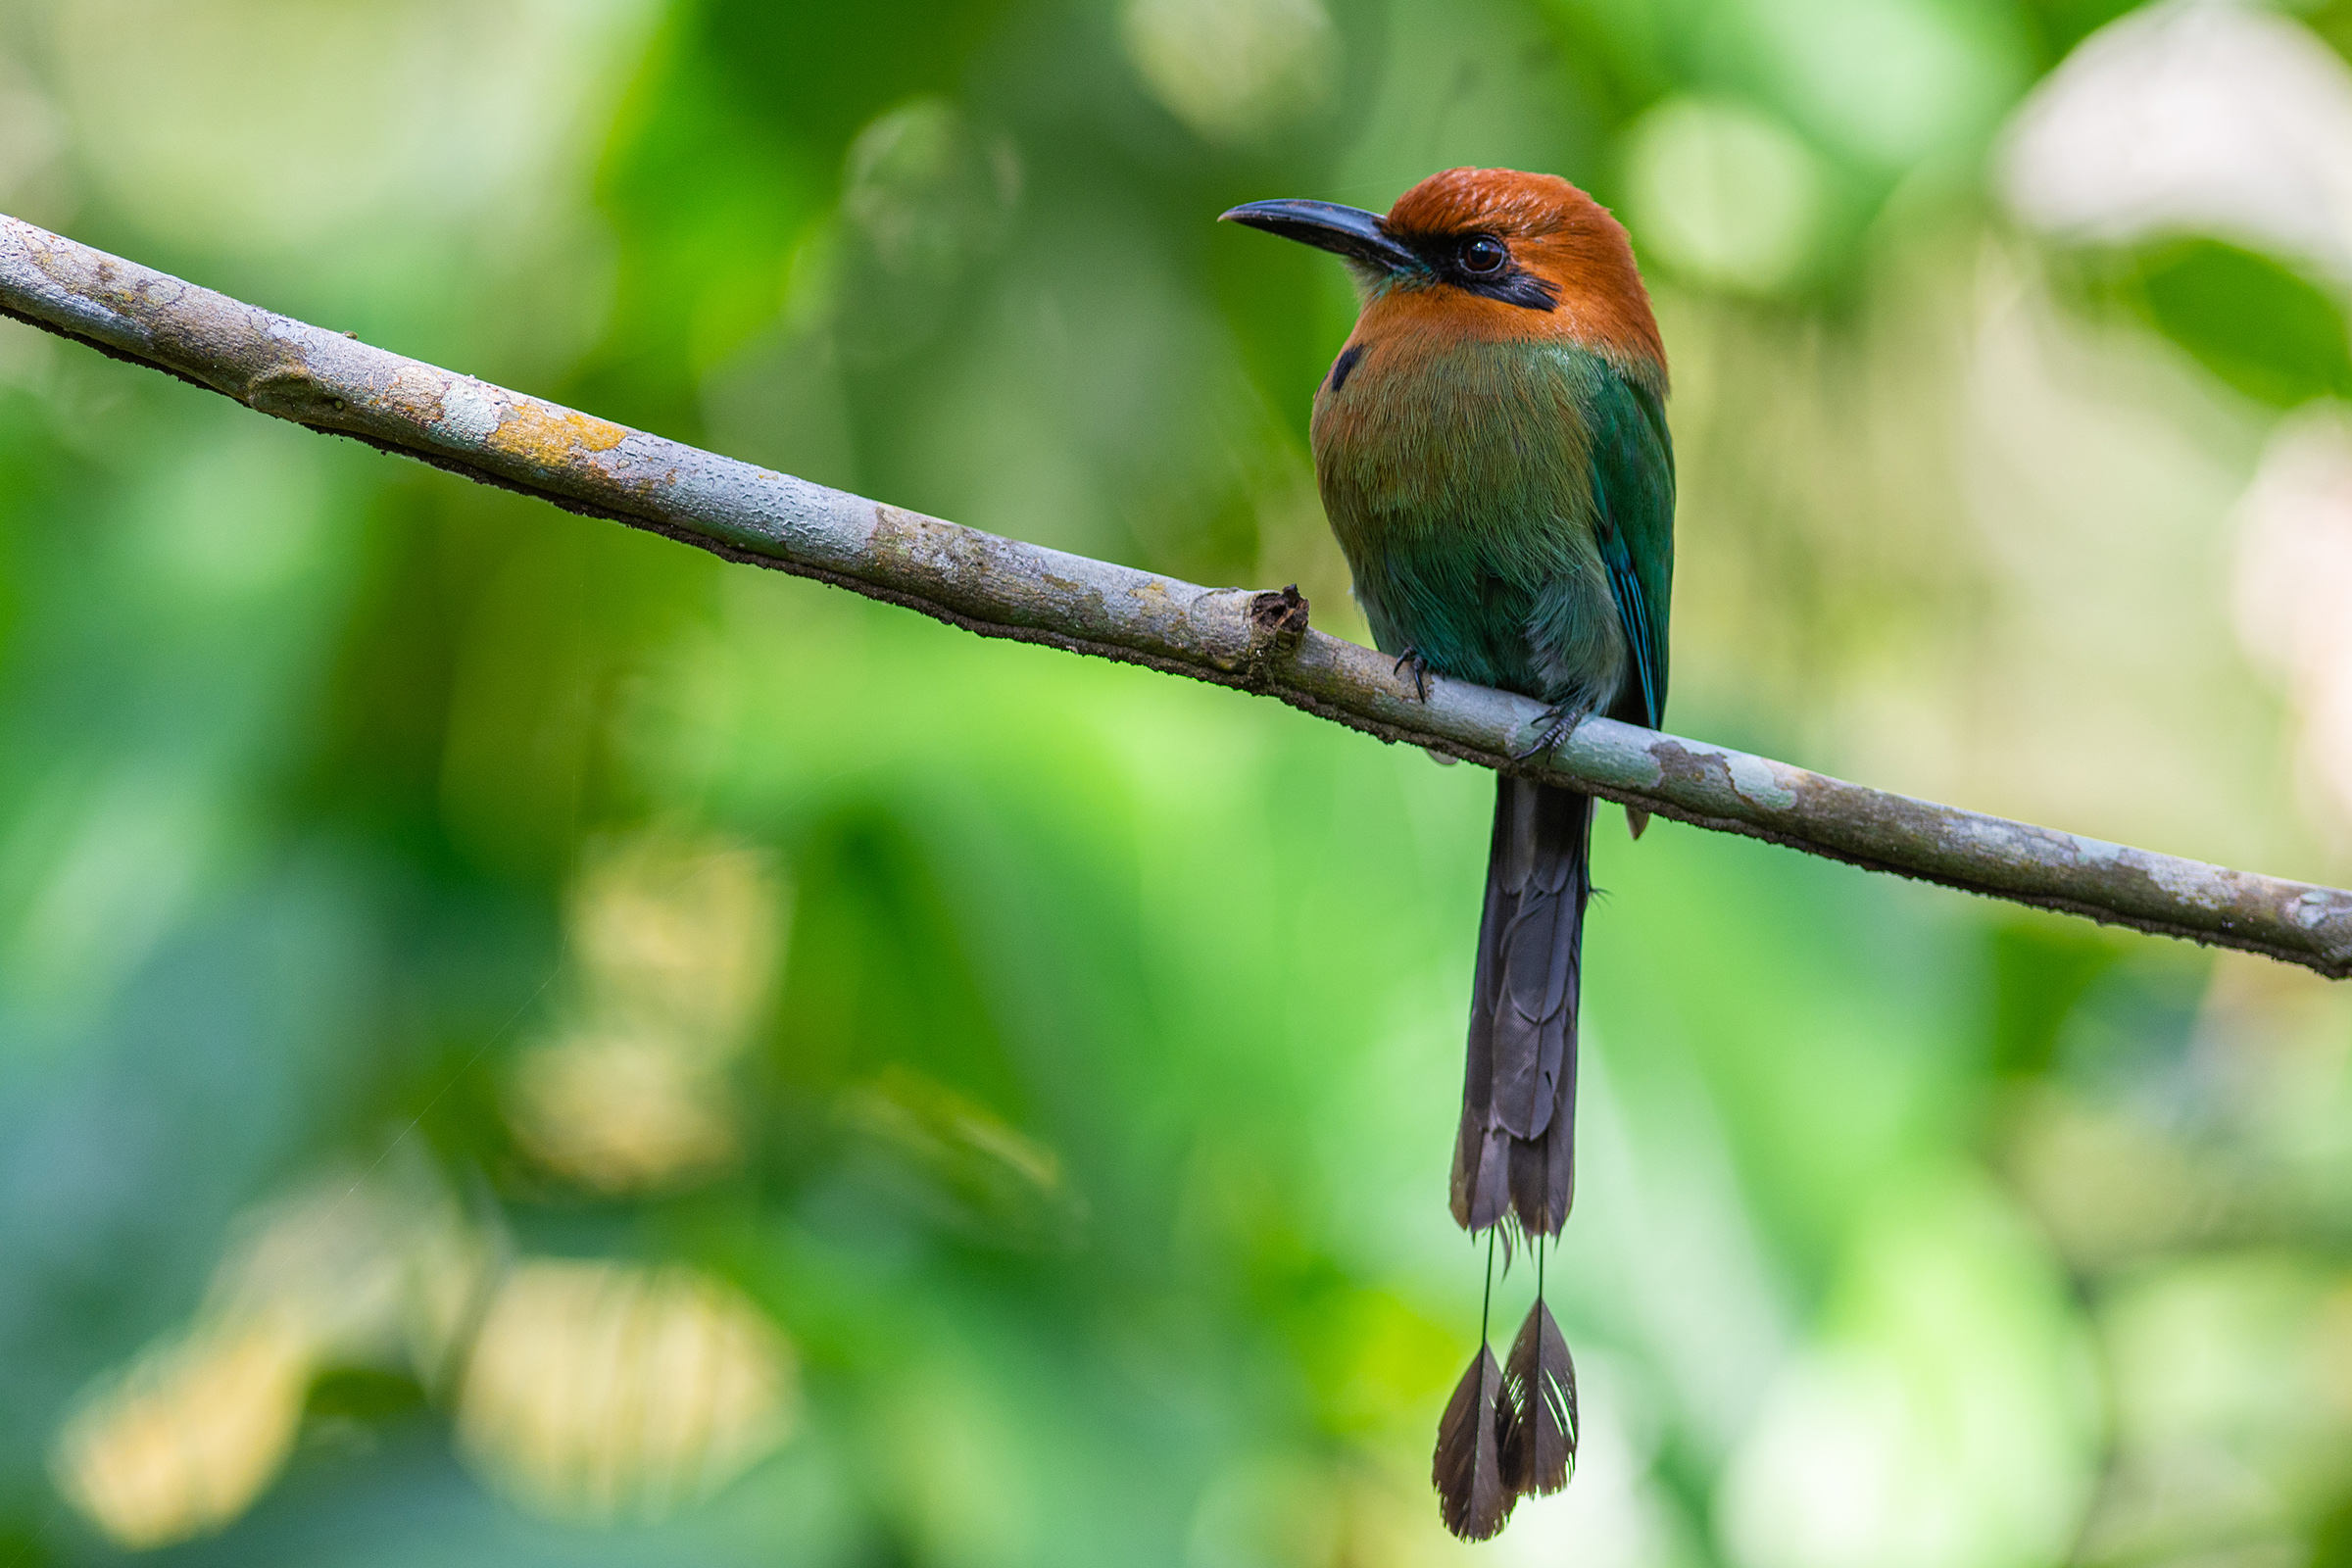 A green bird with a reddish orange head and long tail sits on a branch